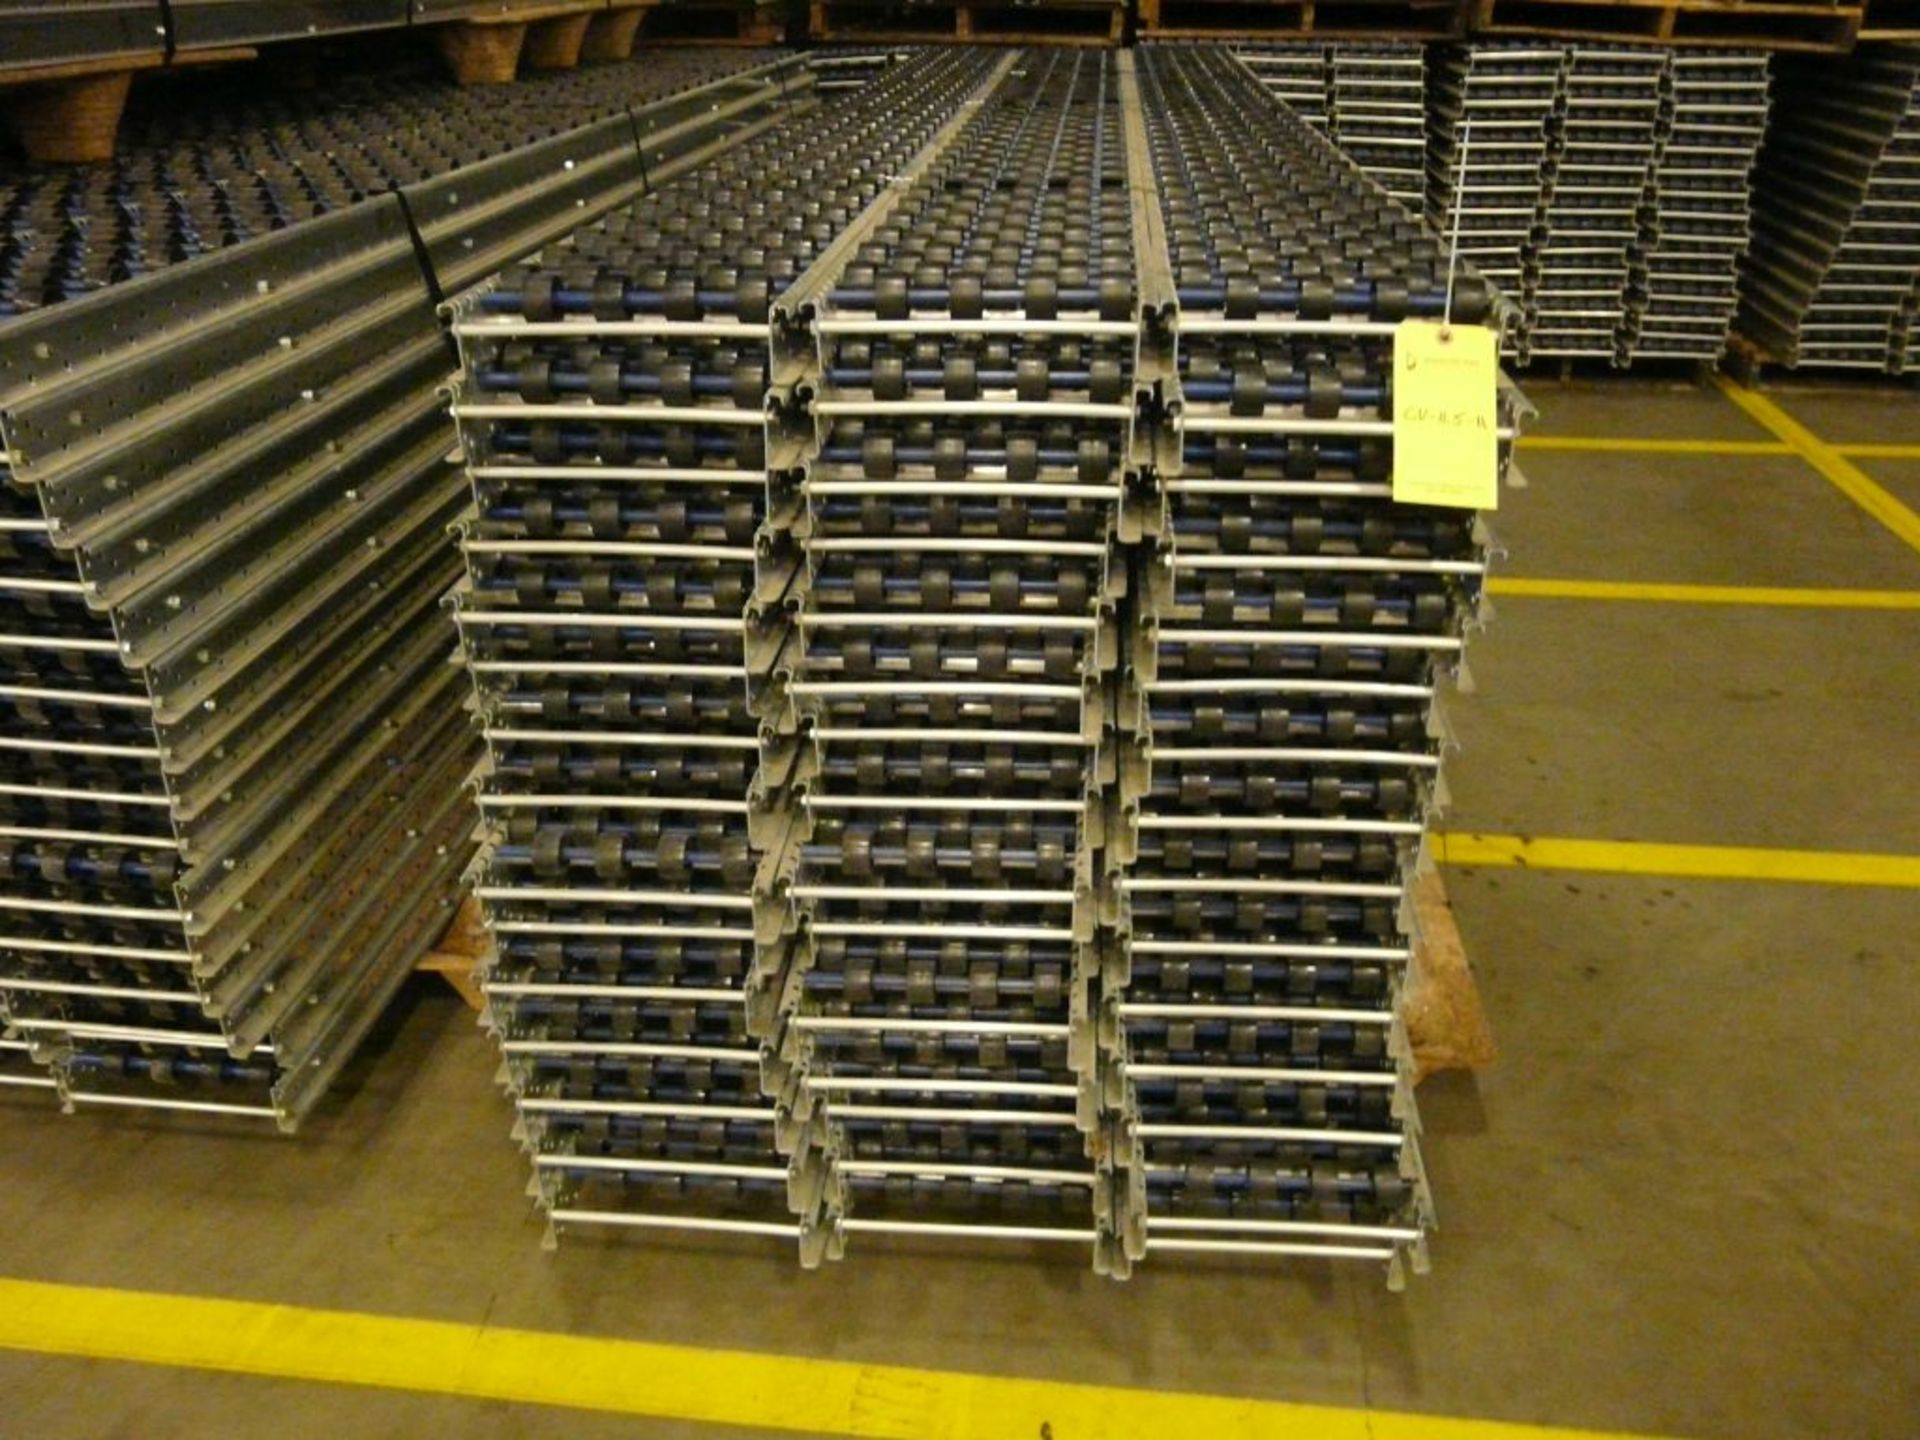 Lot of (90) SpanTrack Wheelbed Carton Flow Conveyors - 11.5'L x 11"W; Tag: 223570 - $30 Lot - Image 2 of 4